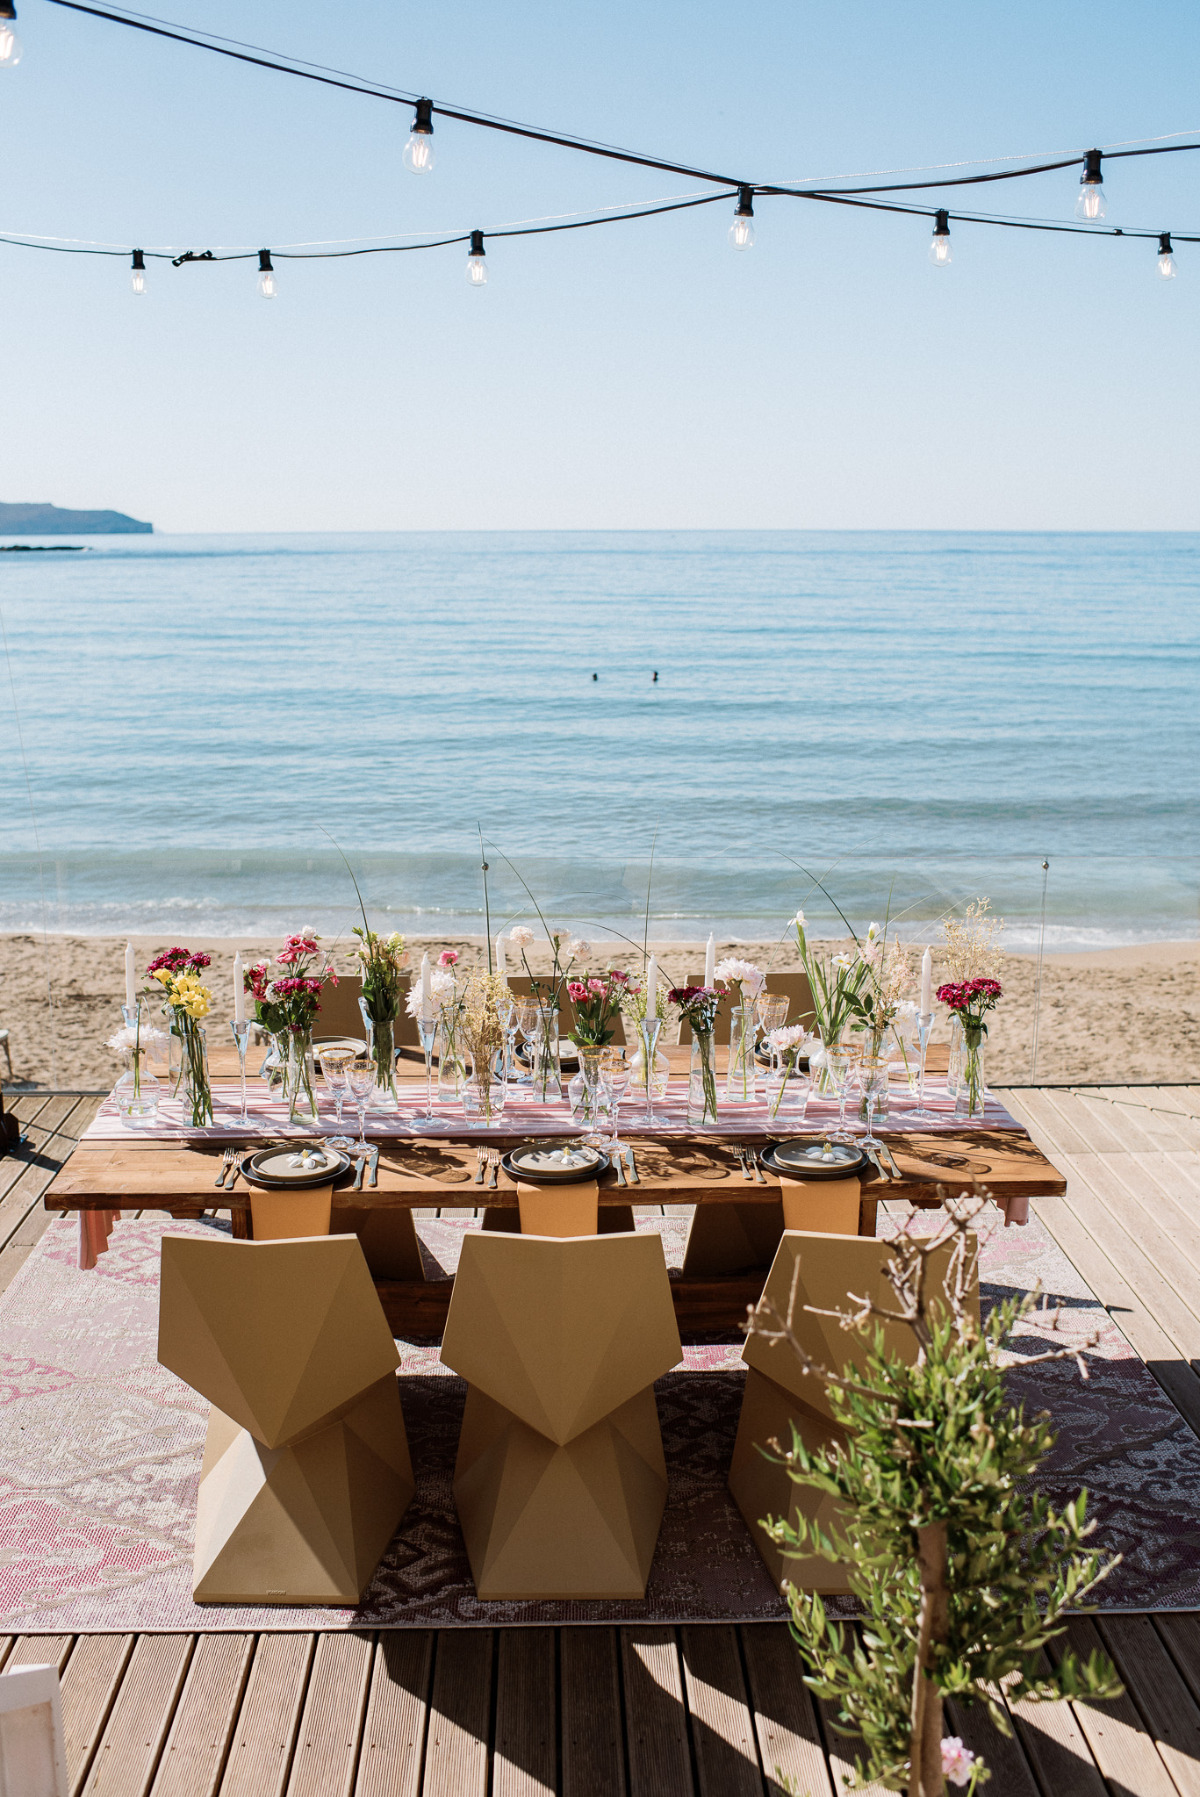 Dusty Blue Summer Vibes in this Crete Wedding Inspiration